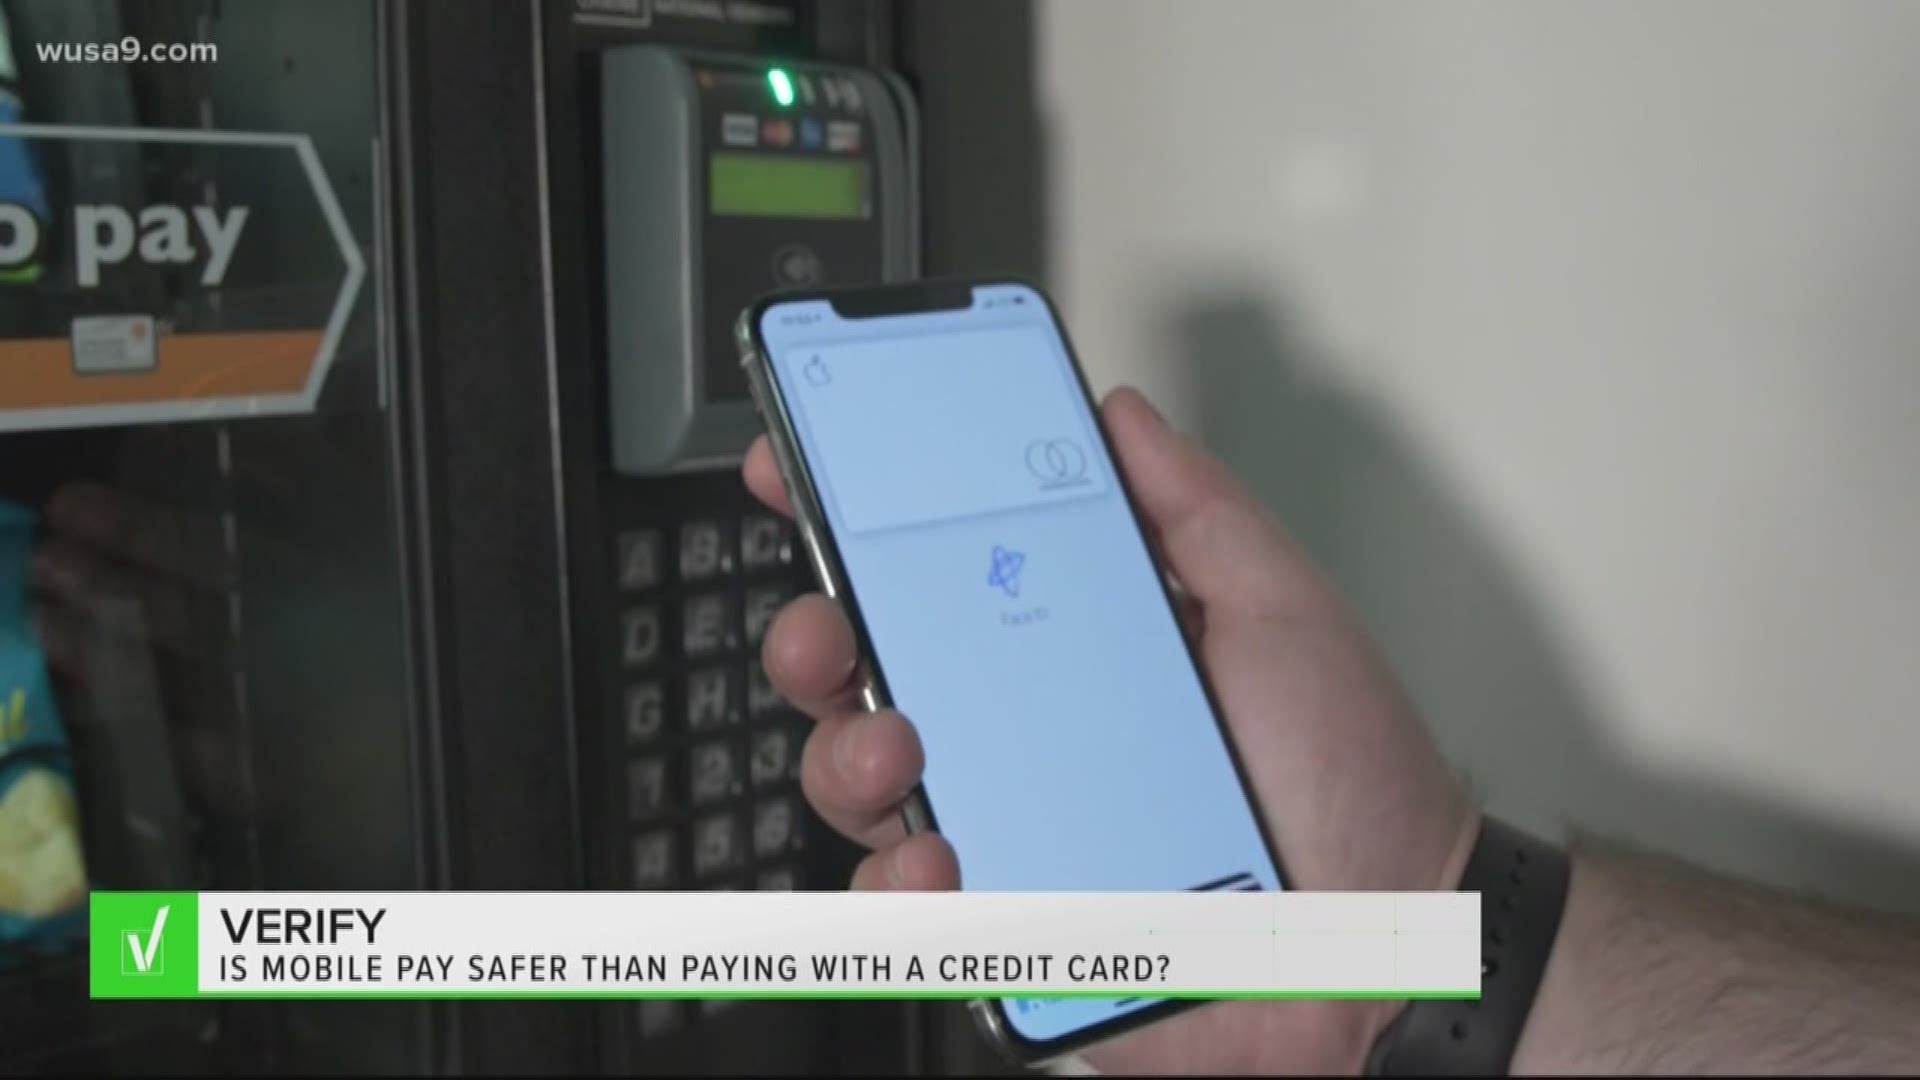 Yes, the Verify team spoke with three cybersecurity experts who all agree, mobile pay apps like Apple, Google and Samsung have more sophisticated safety features.